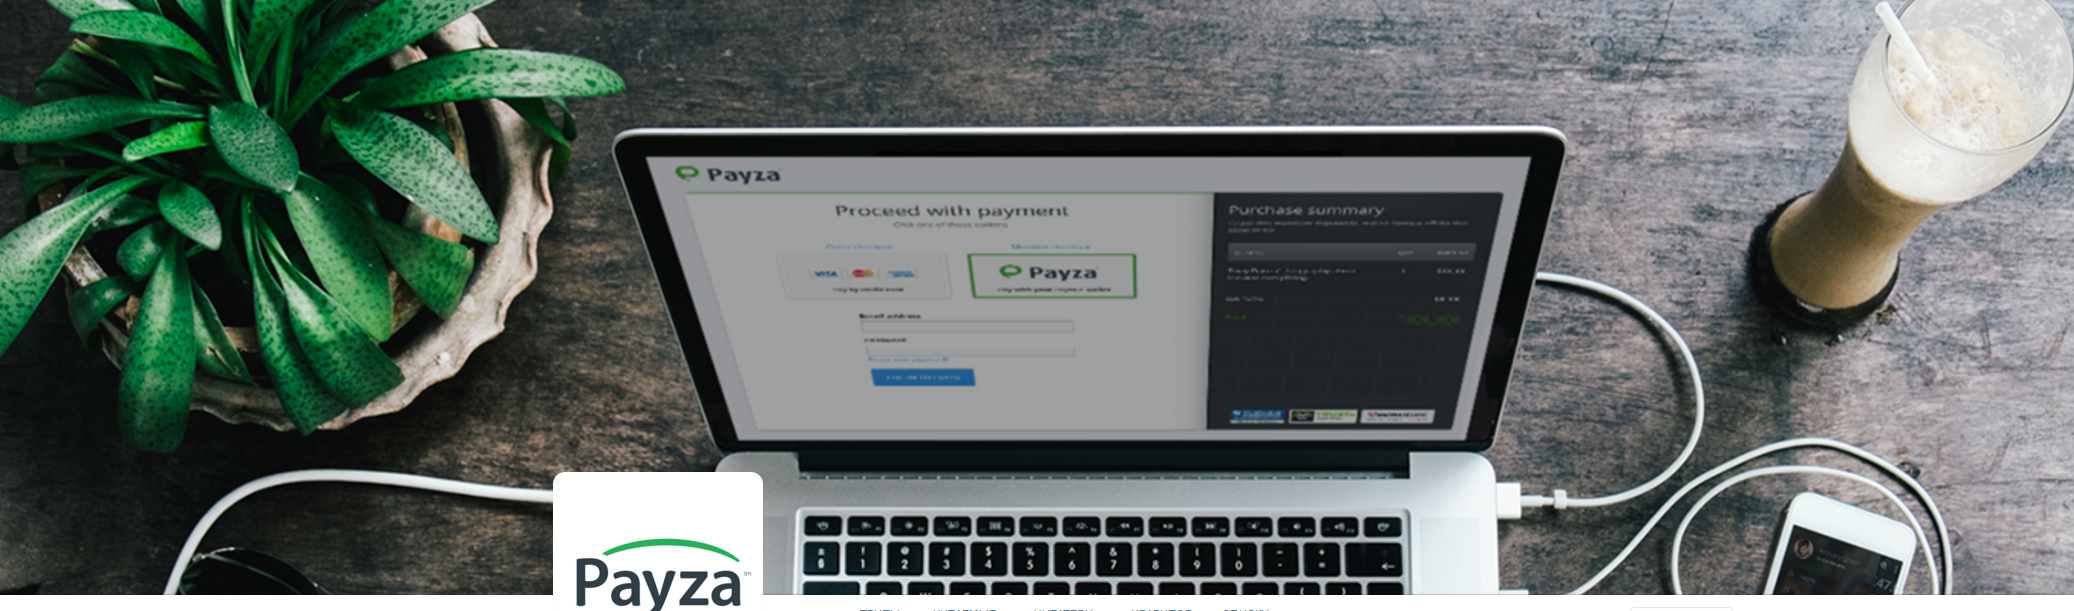 Earn money with Payza!